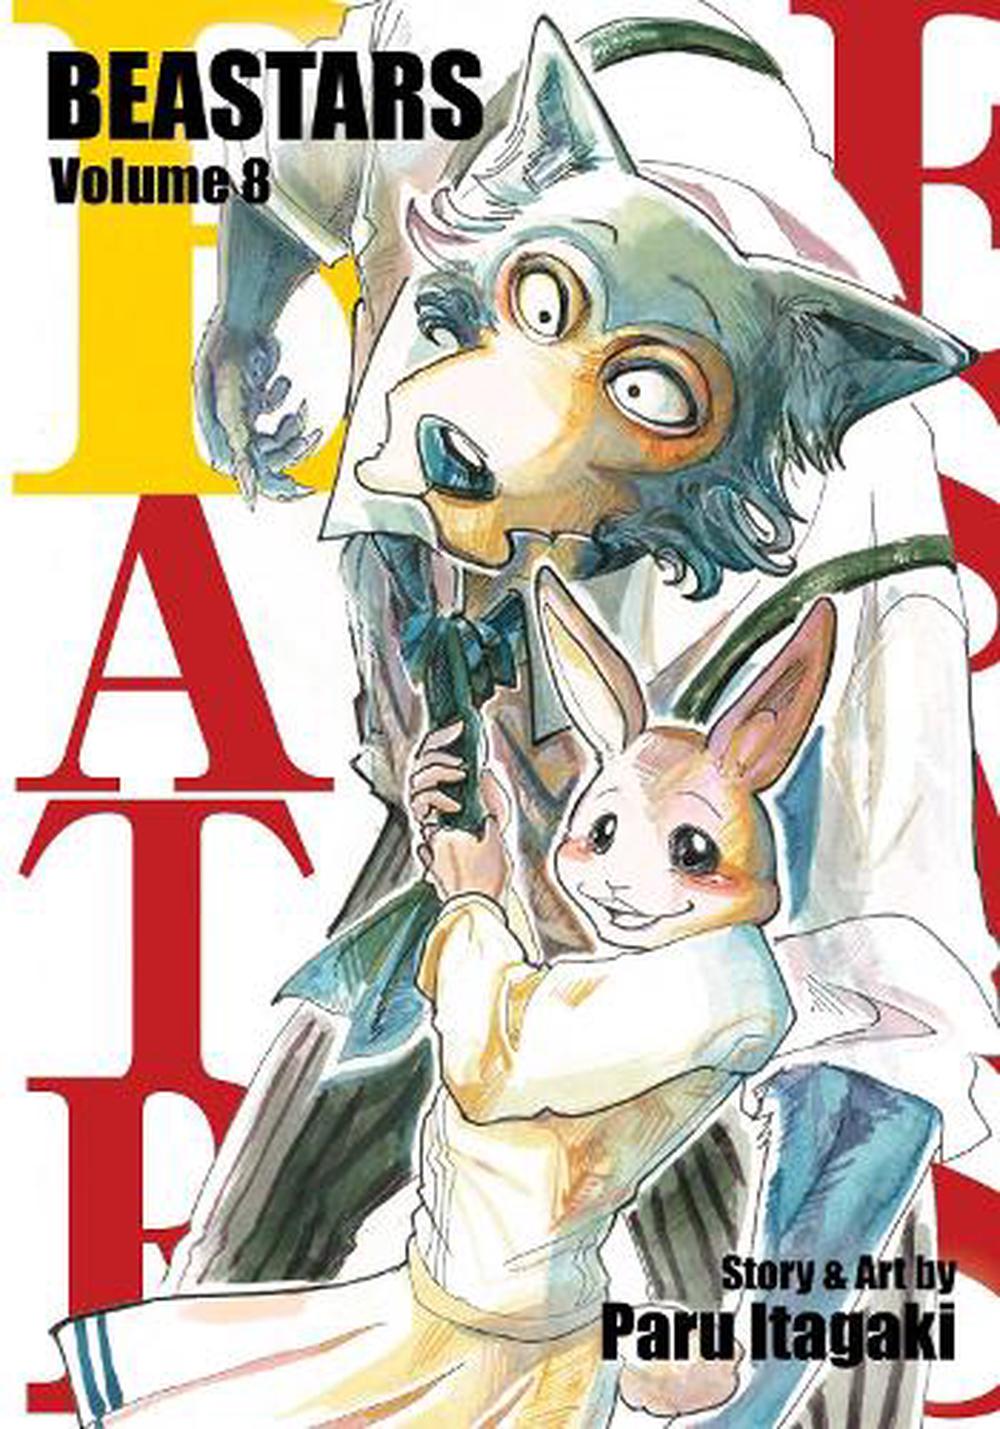 Beastars Vol 8 By Paru Itagaki Paperback Buy Online At The Nile